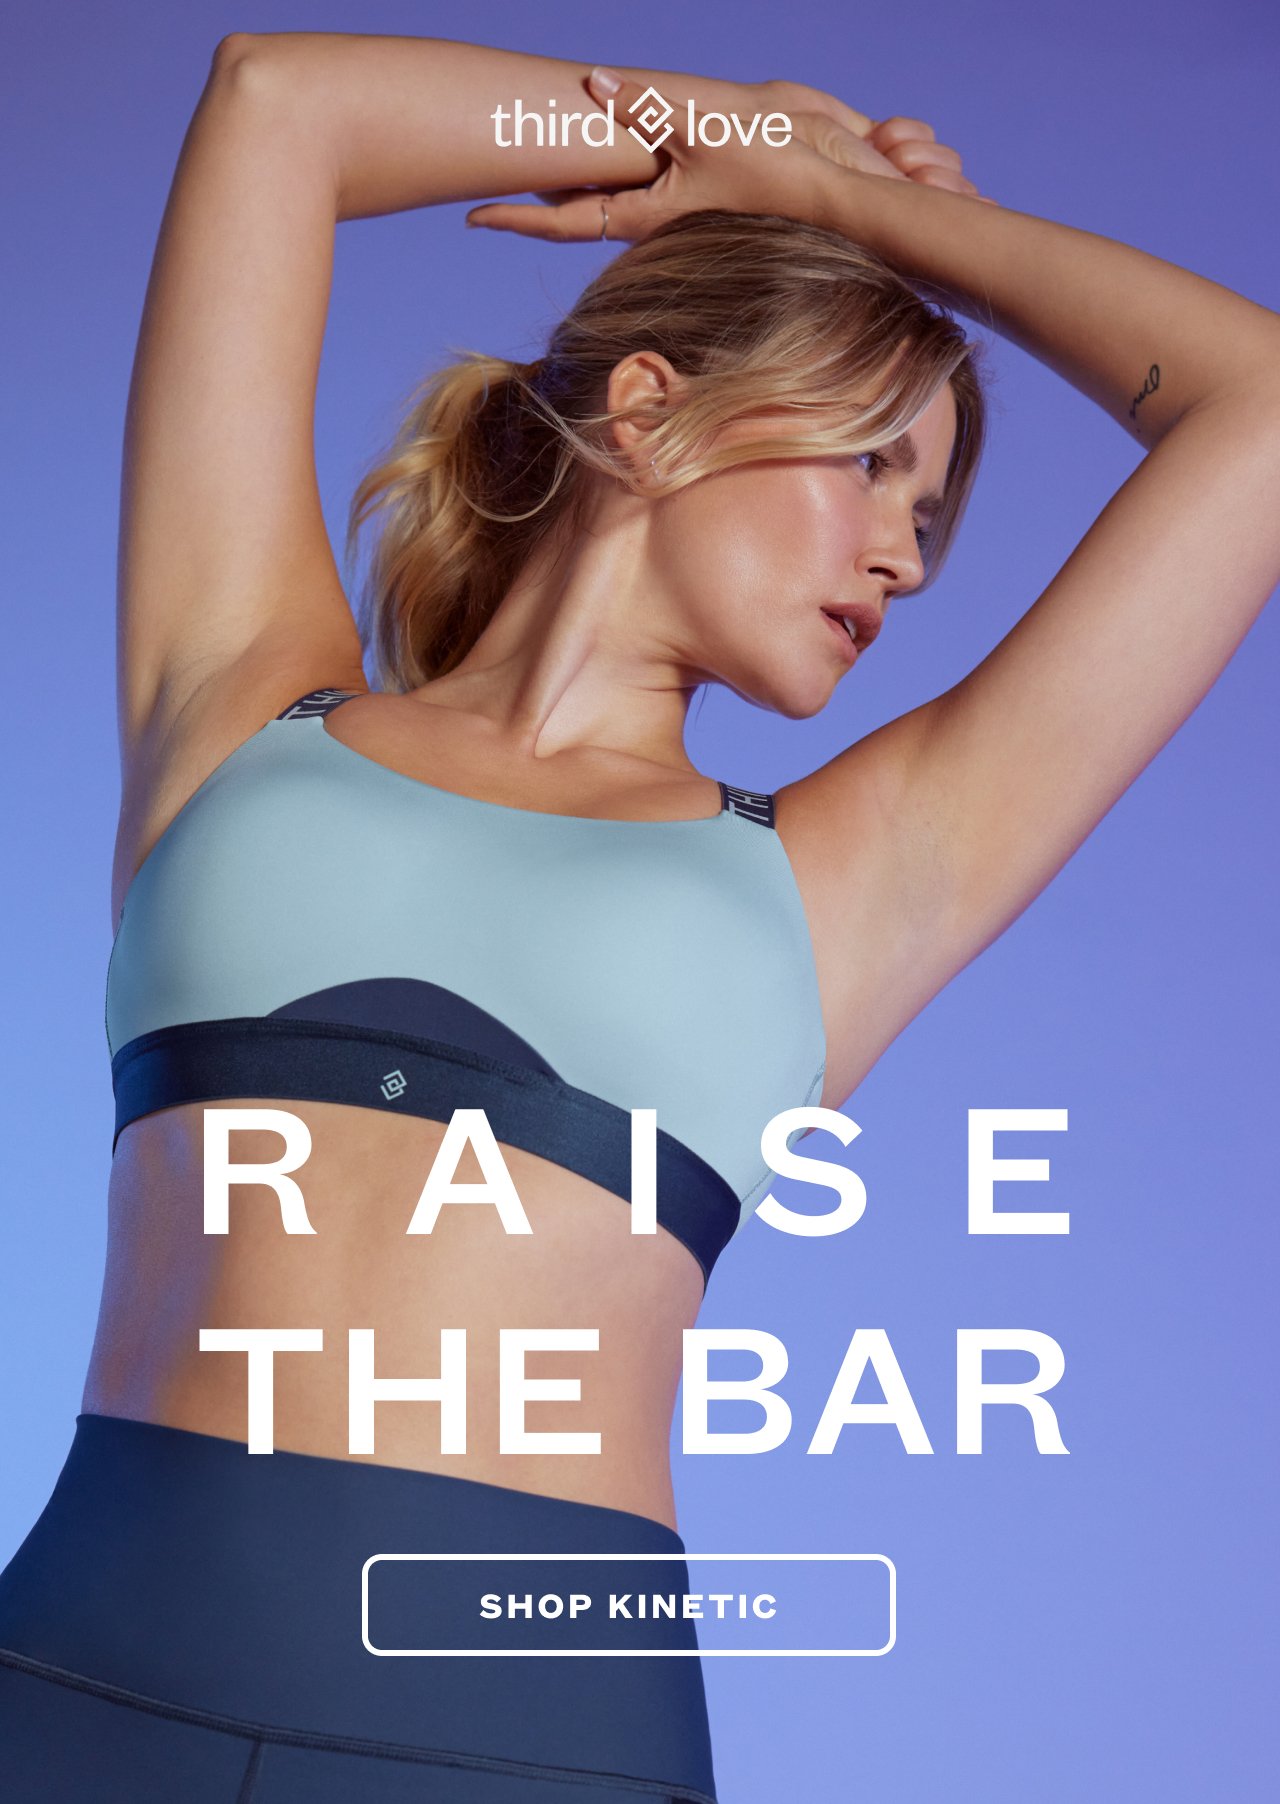 Third Love: Sports bra, reinvented: the Kinetic